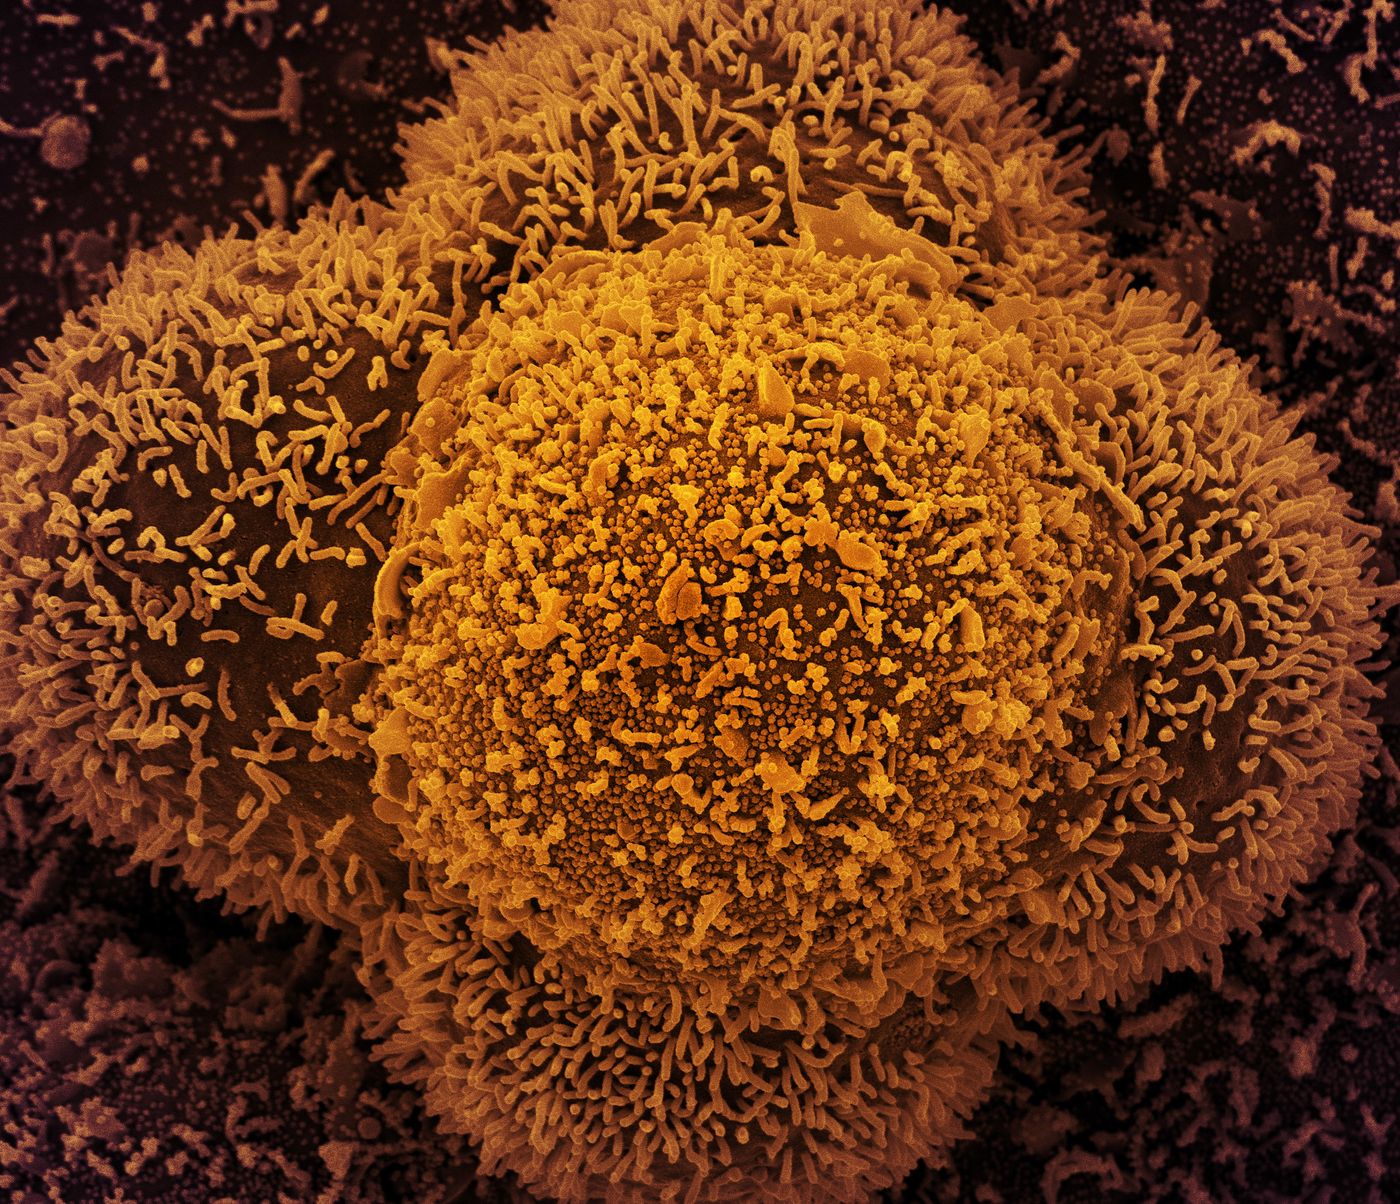 CCL-81 cells heavily infected with SARS-CoV-2 virus particles. The small spherical structures in the center of the image are SARS-CoV-2 virus particles. The string-like protrusions extending from the cells are cell projections or pseudopodium. Image captured at the NIAID Integrated Research Facility (IRF) in Fort Detrick, Maryland. / Credit: NIAID